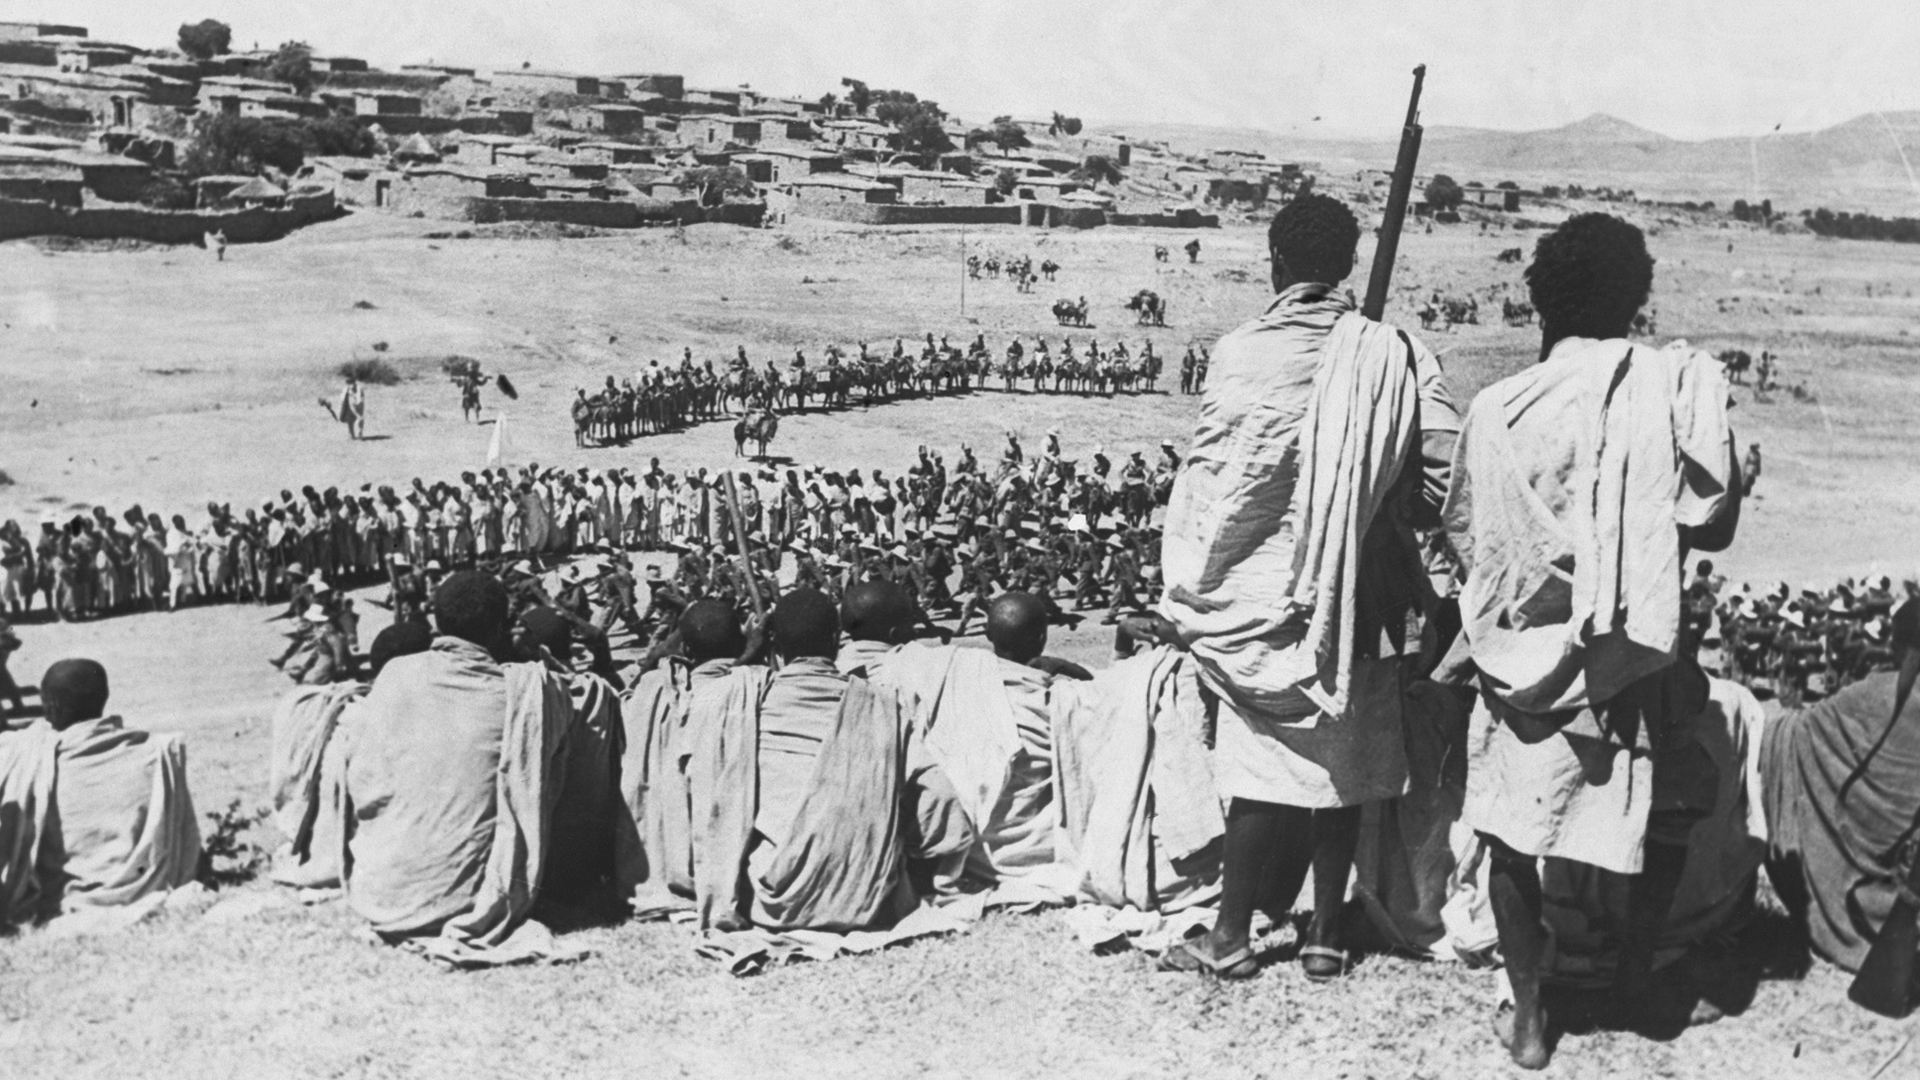 <p>Fascist-dominated Italy invades Ethiopia, one of the last African states to remain uncolonised. The League of Nations, of which both Italy and Ethiopia are members, fails to prevent the invasion, highlighting its own weakness.</p>